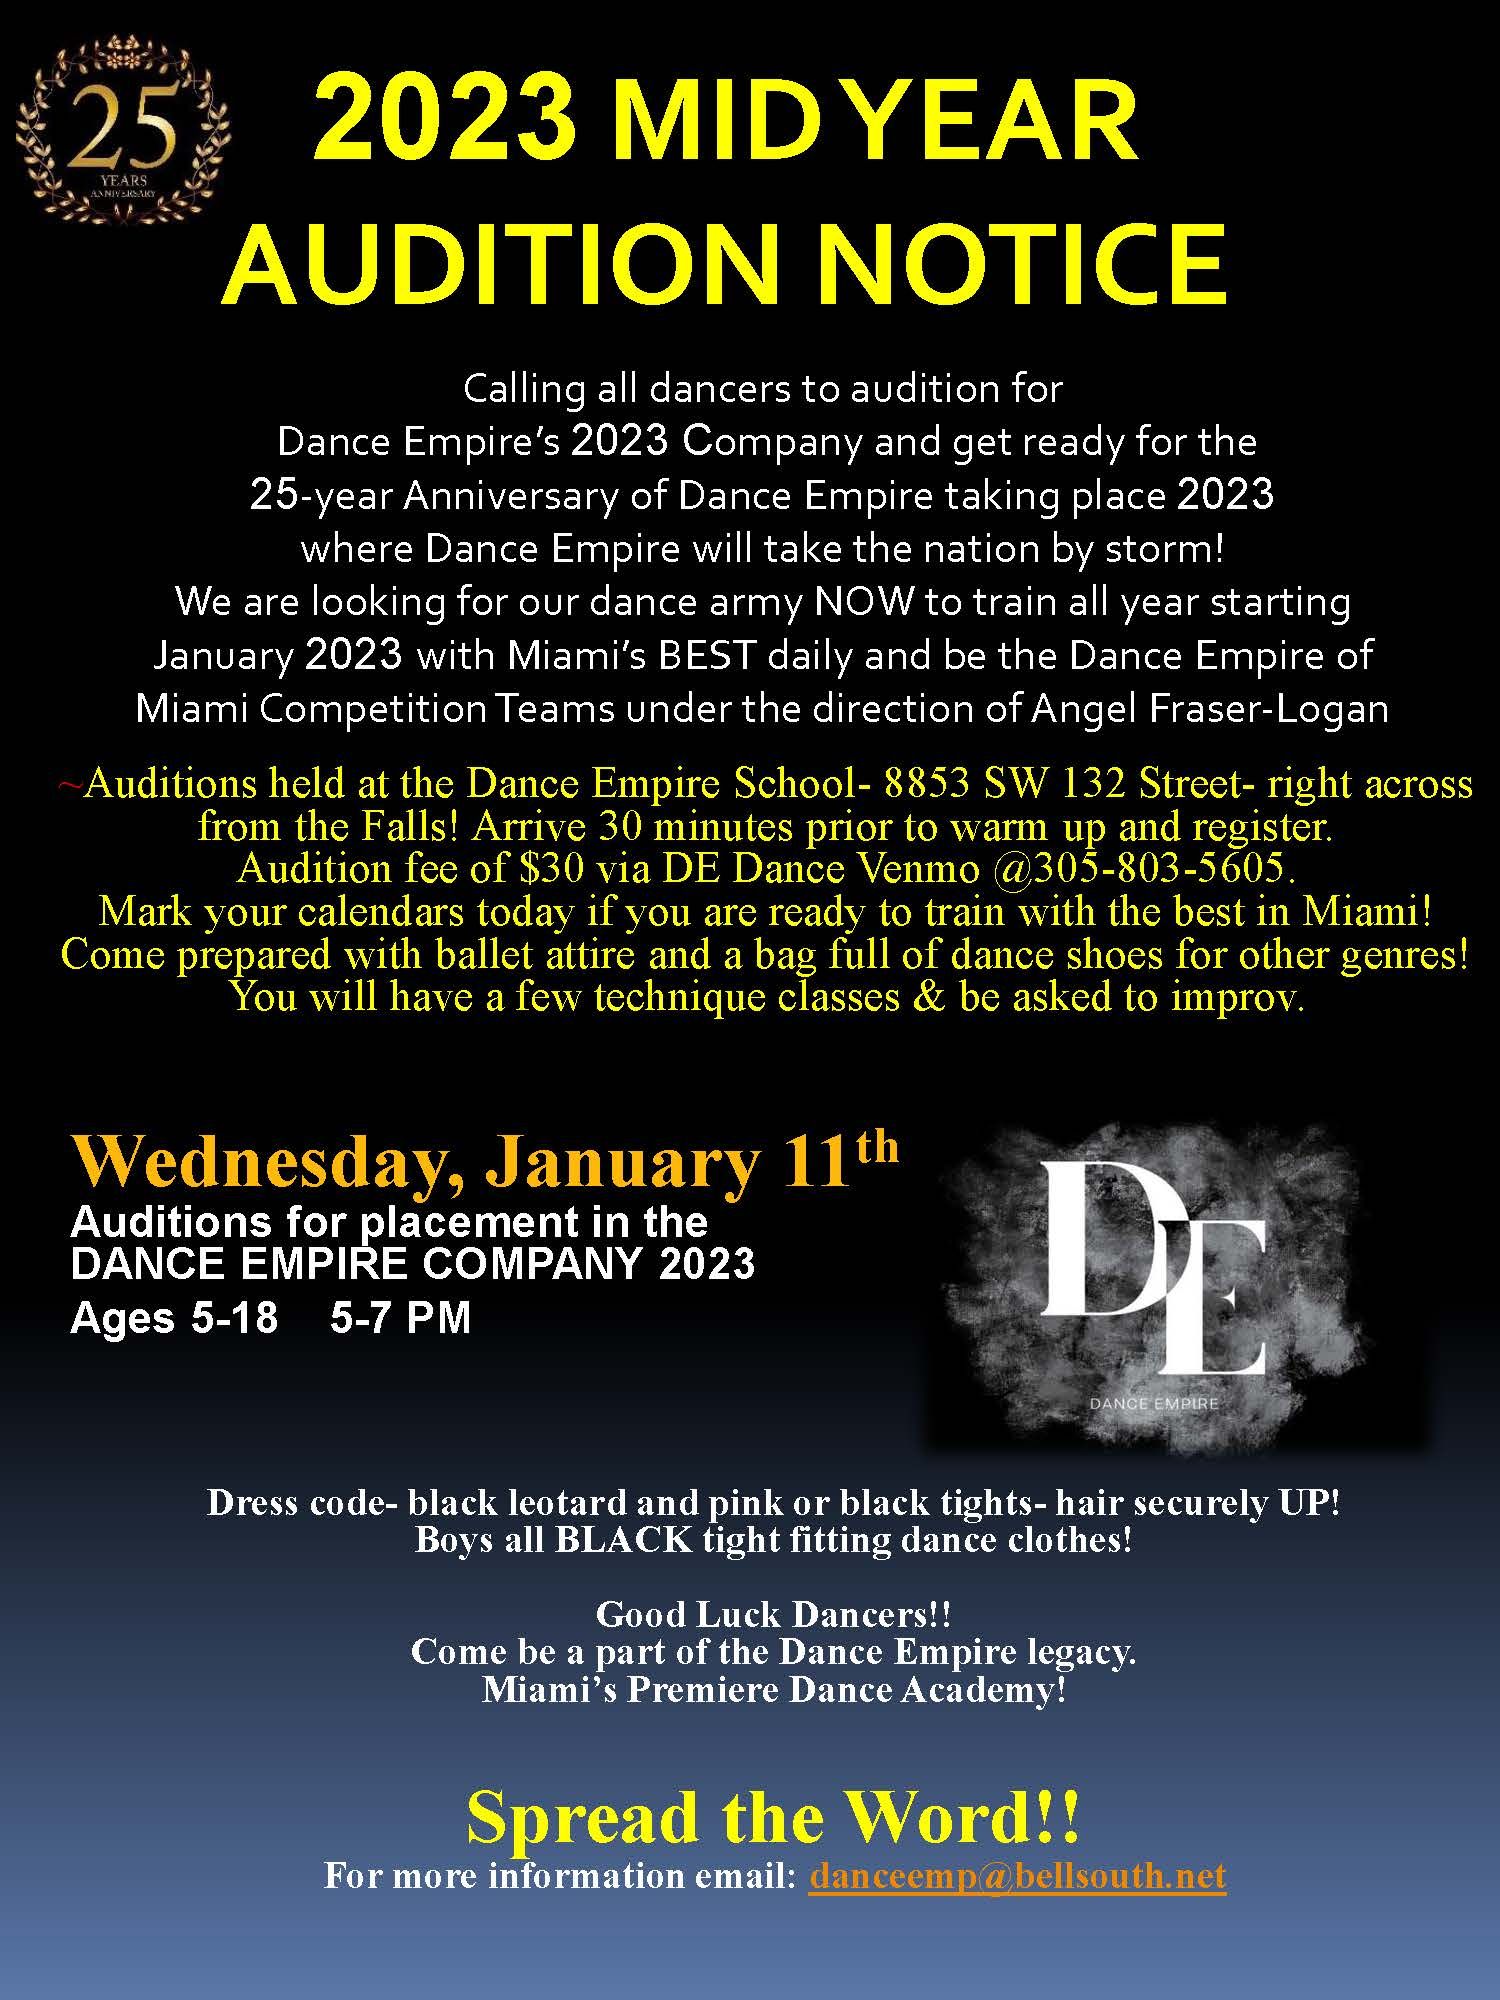 2023 Mid Year Dance Empire Audition Notice! Color.jpg